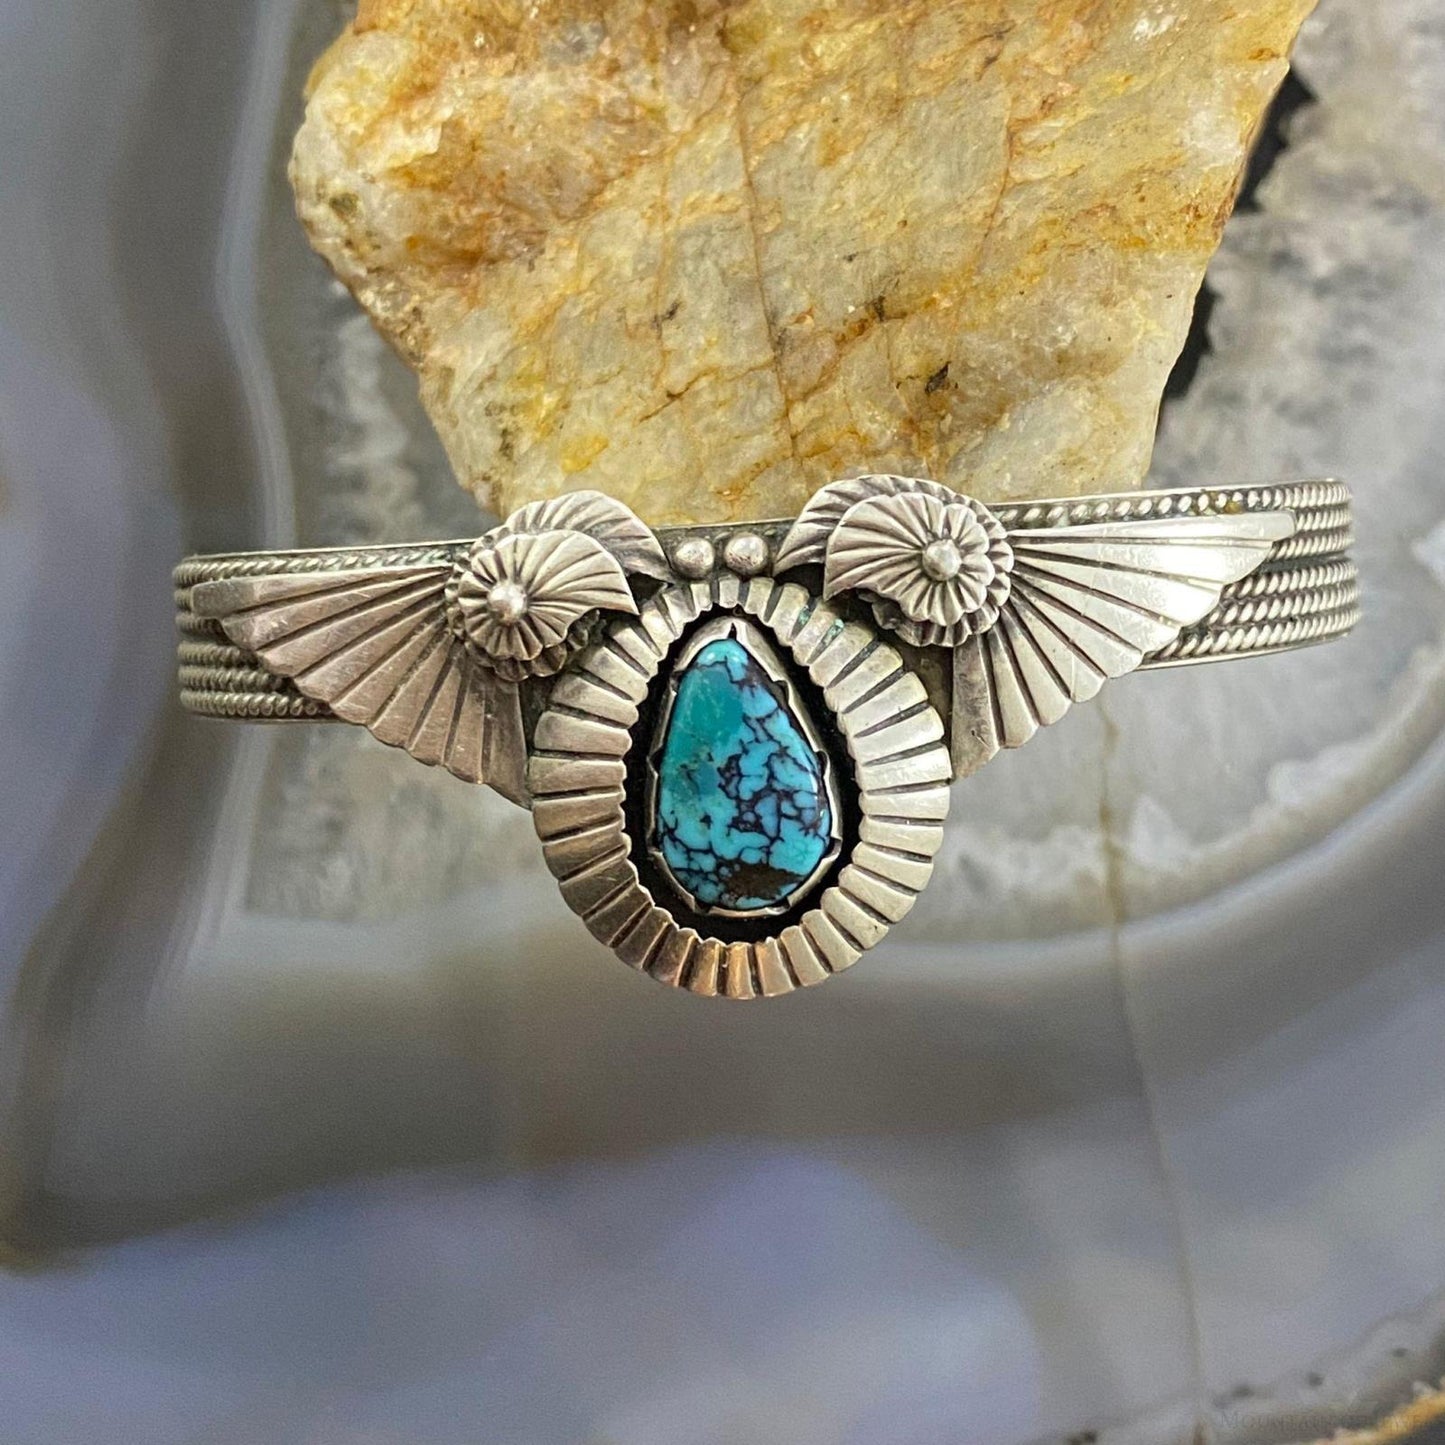 Vintage Native American Silver Teardrop Turquoise Decorated Bracelet For Women